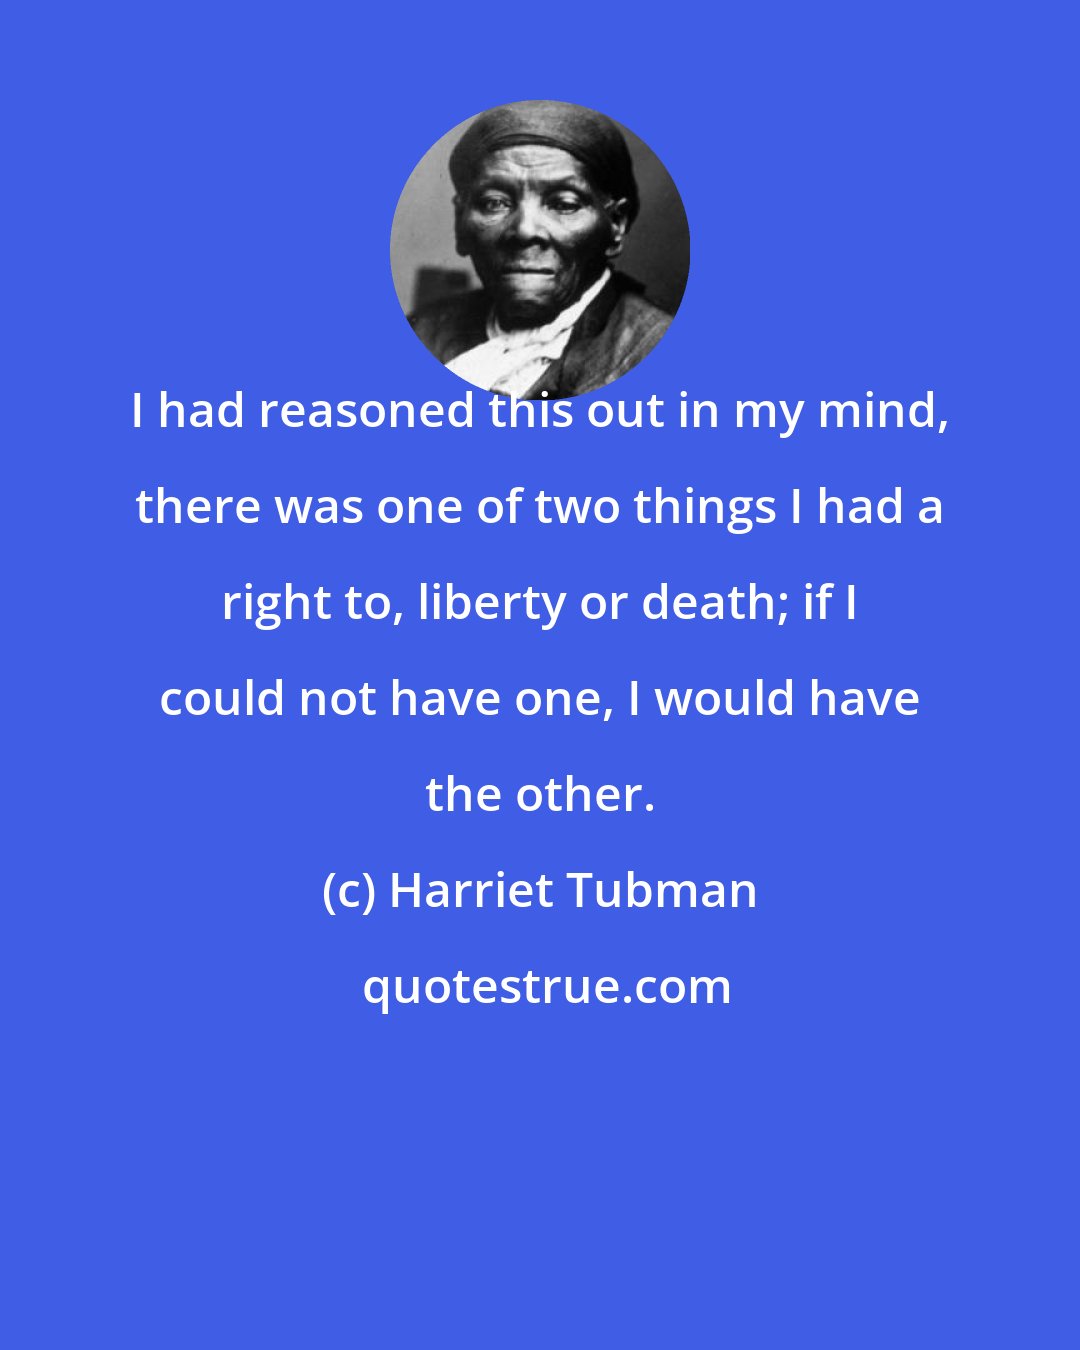 Harriet Tubman: I had reasoned this out in my mind, there was one of two things I had a right to, liberty or death; if I could not have one, I would have the other.